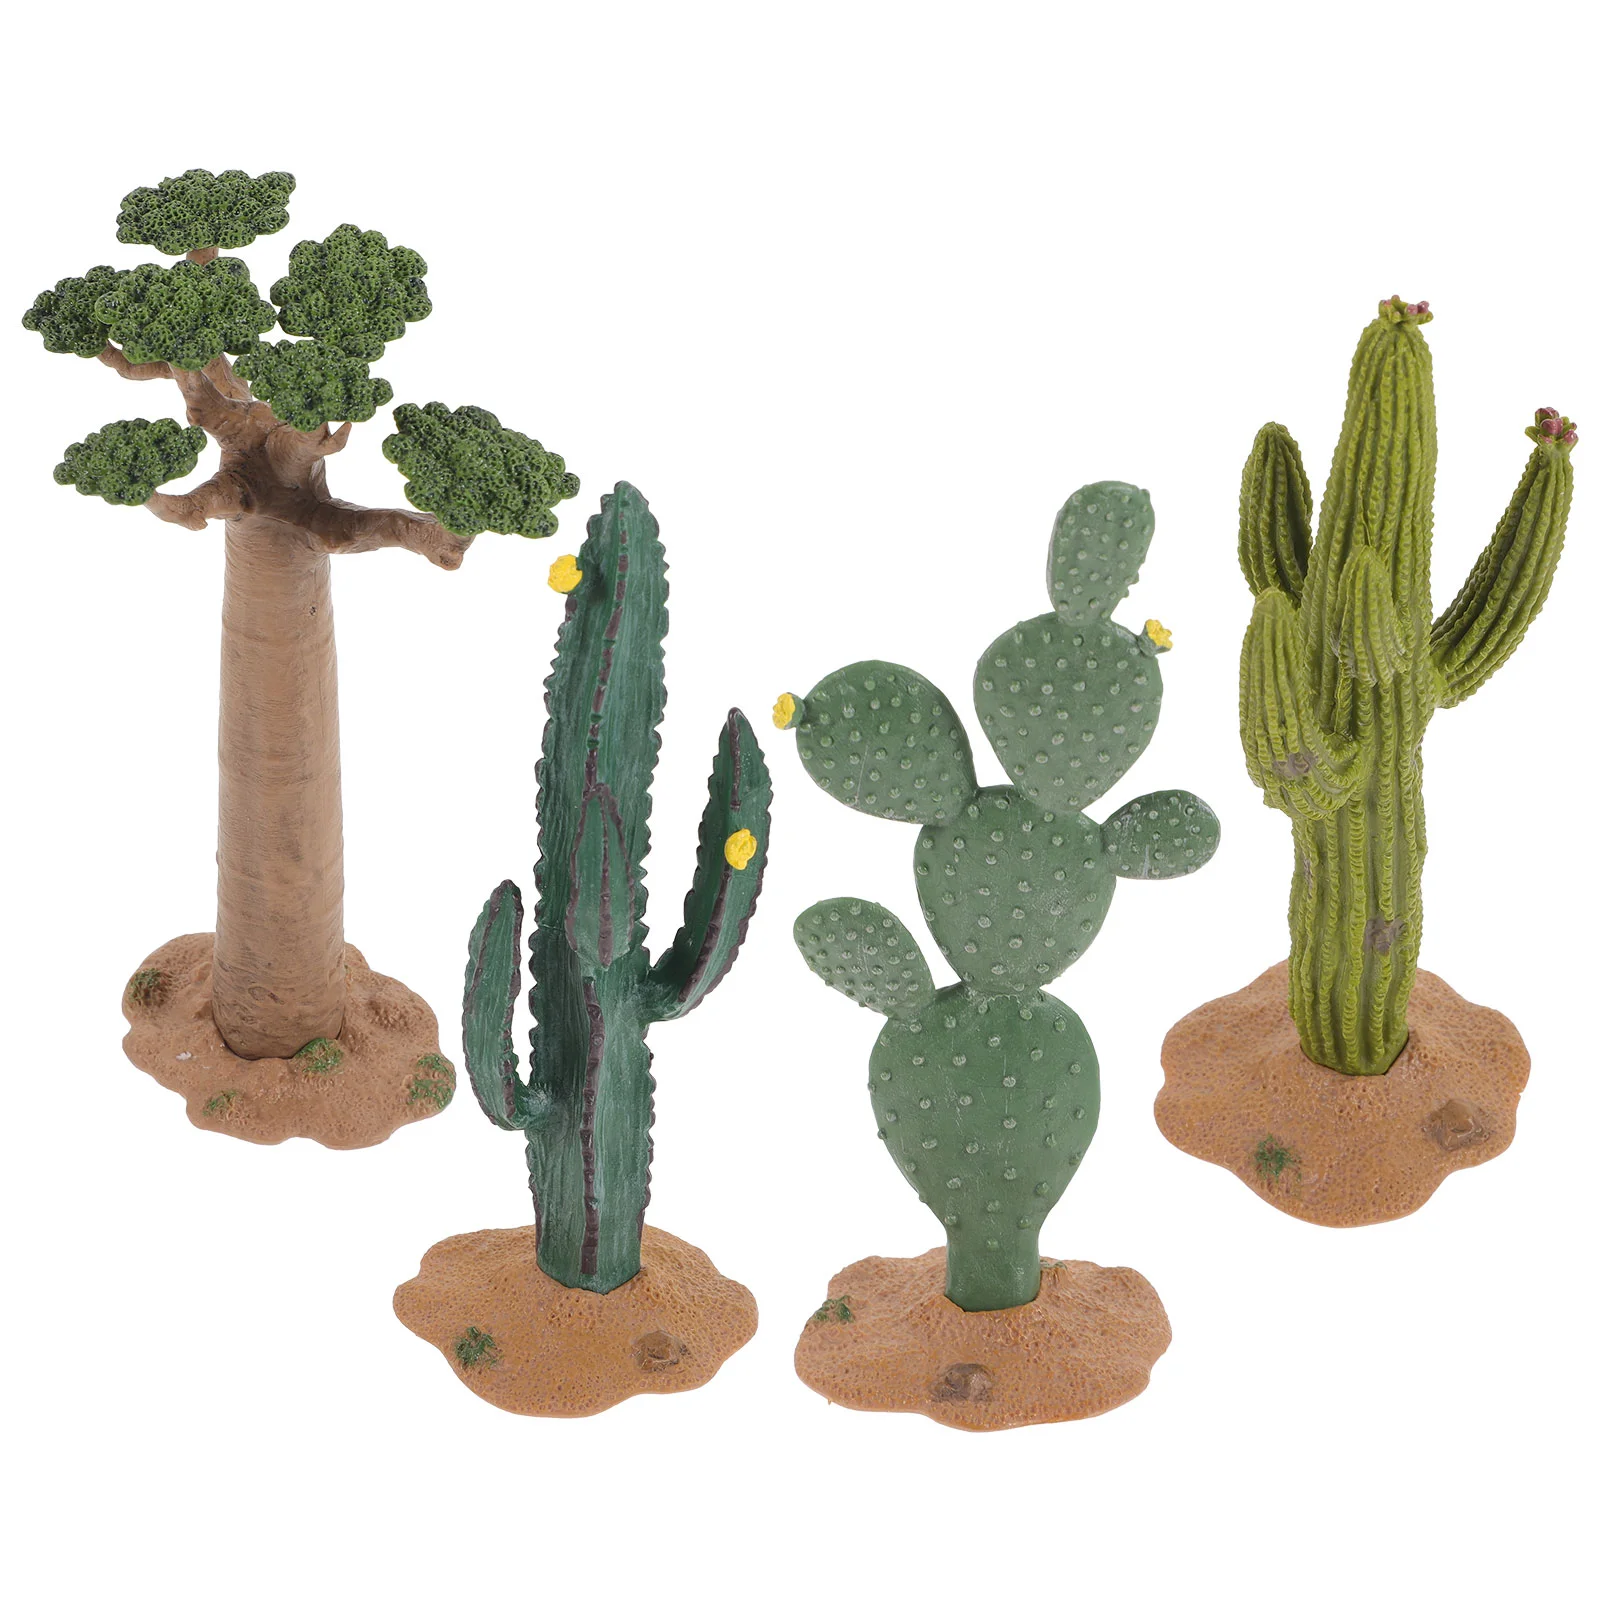 

Cactus Moss Decor Artificial Prop The Summer Bling Bedroom Landscape Plastic Simulated Adornments